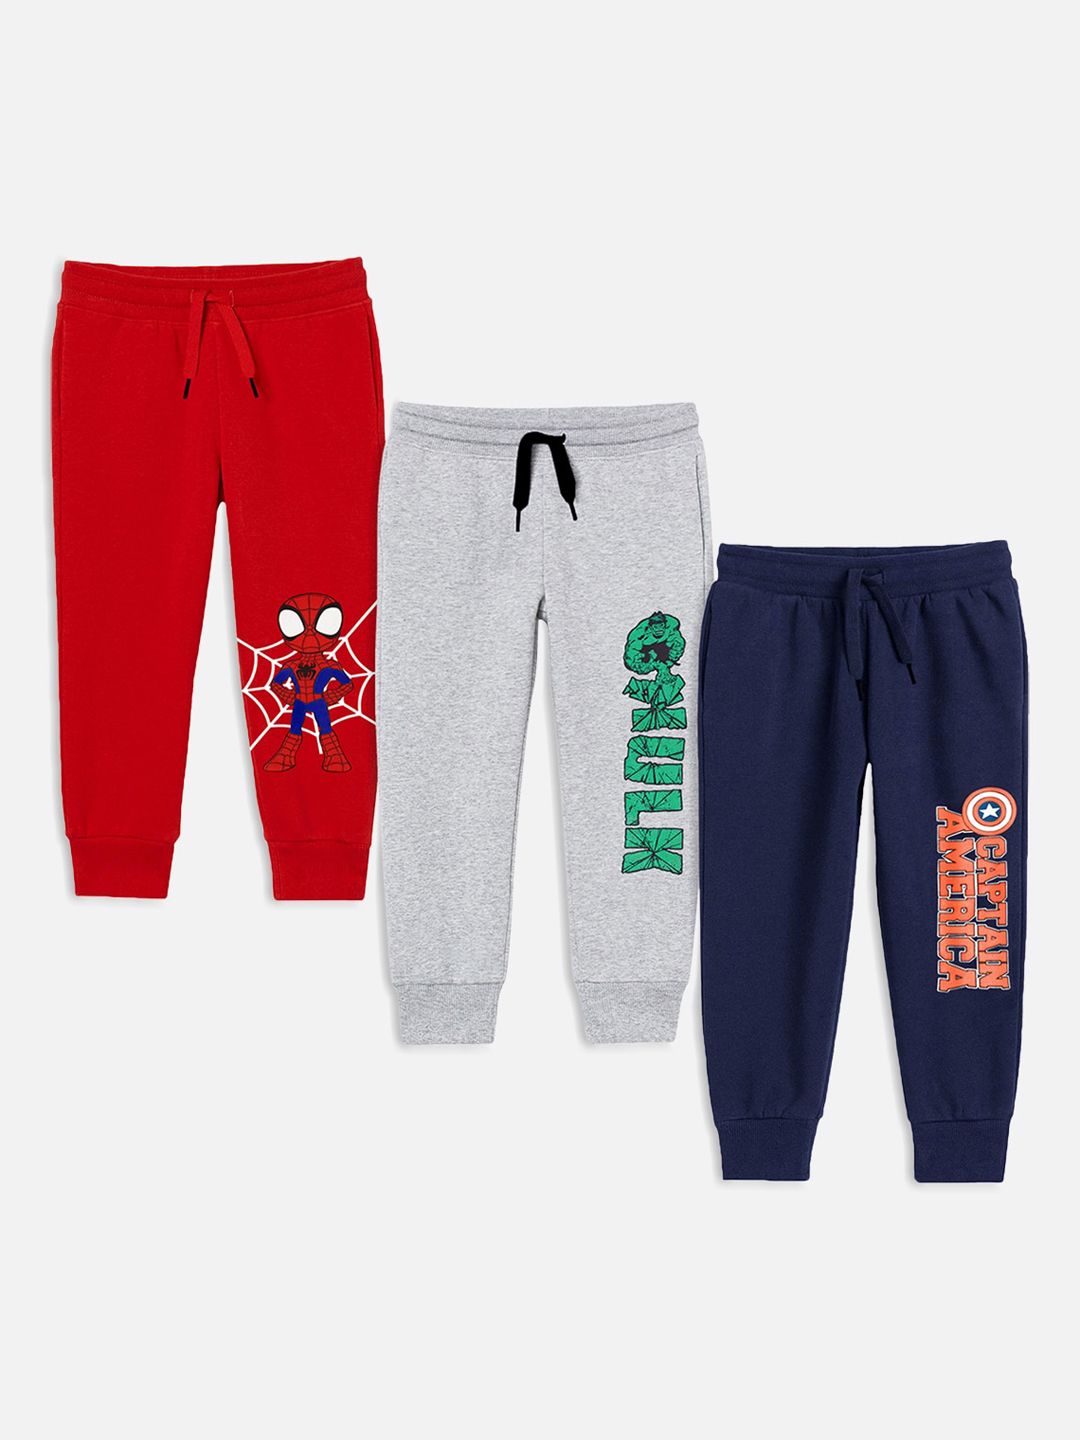 Buy Blue Track Pants for Boys by TIGERTRAIL Online | Ajio.com